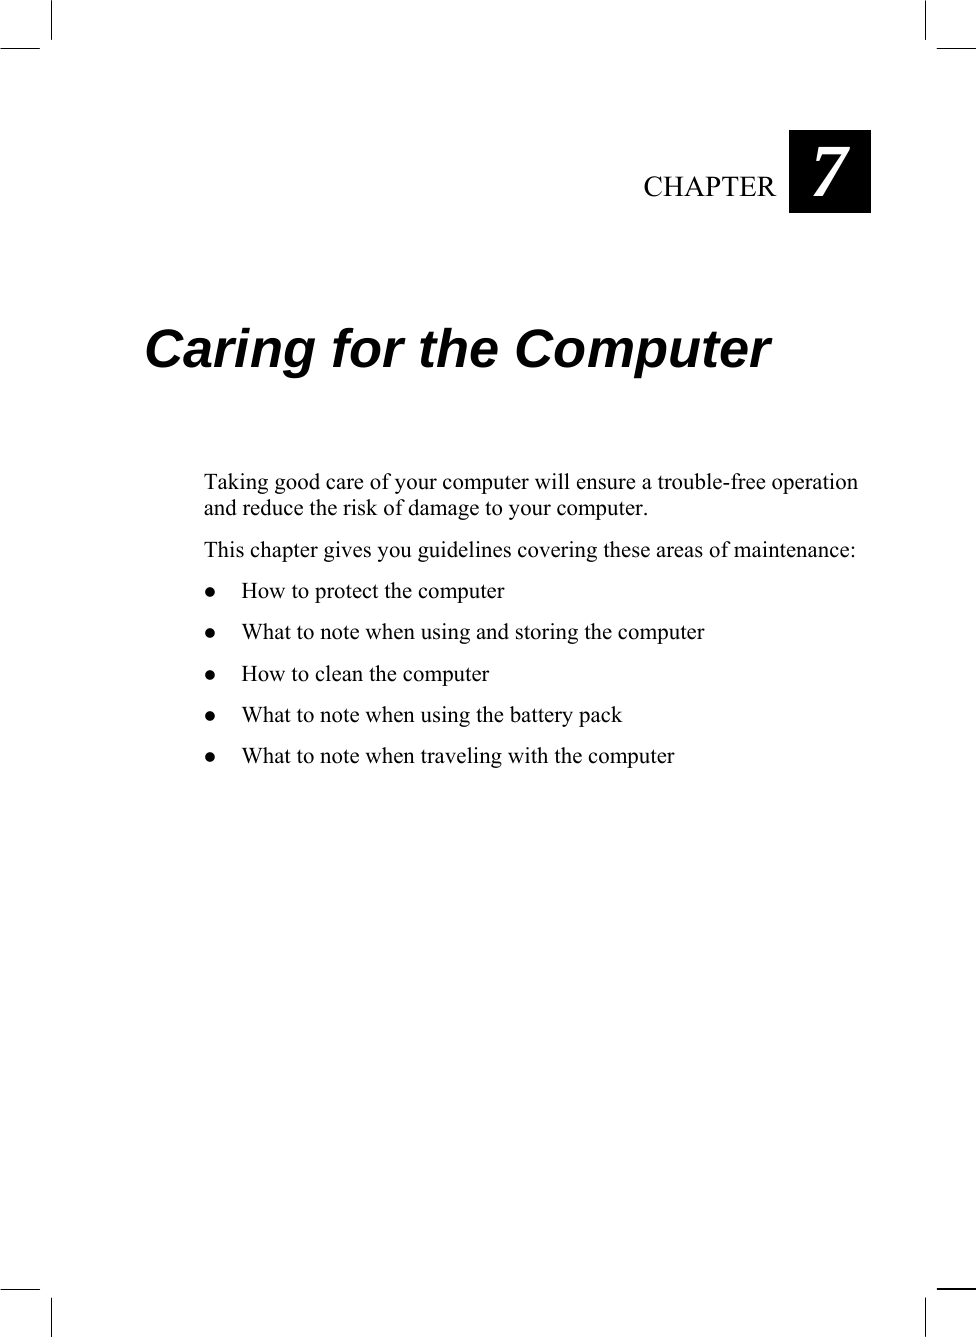   CHAPTER  7 Caring for the Computer Taking good care of your computer will ensure a trouble-free operation and reduce the risk of damage to your computer. This chapter gives you guidelines covering these areas of maintenance:   How to protect the computer   What to note when using and storing the computer   How to clean the computer   What to note when using the battery pack   What to note when traveling with the computer 